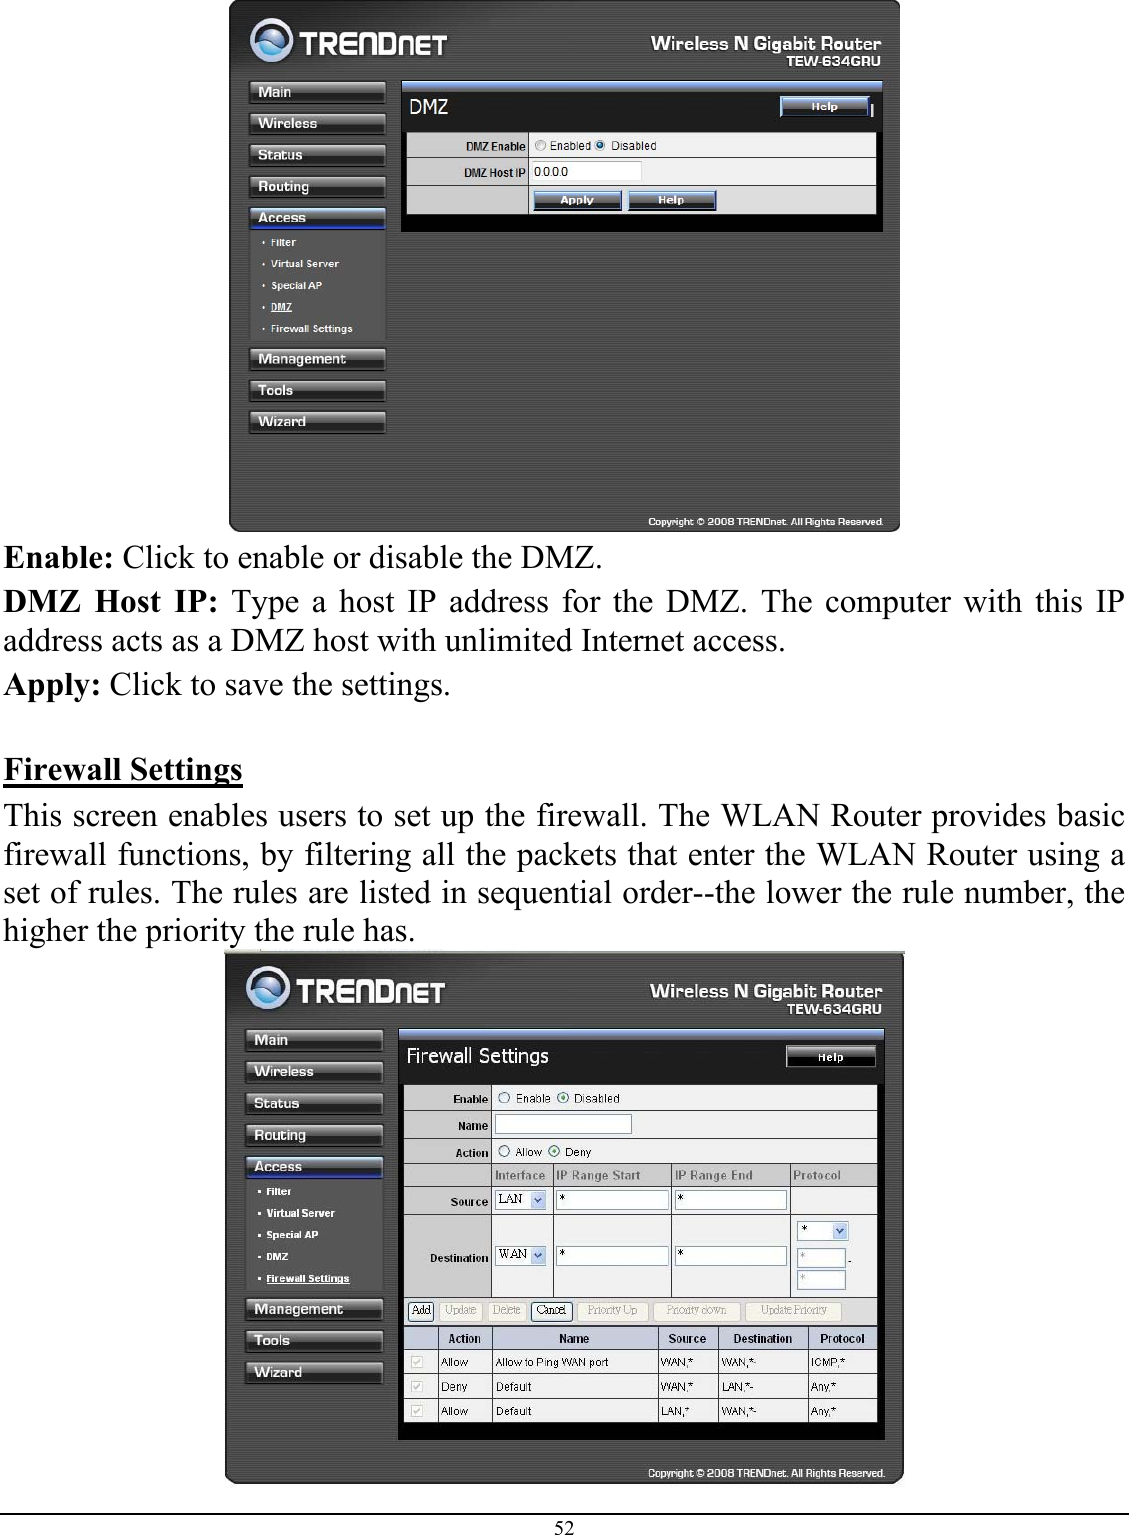 52   Enable: Click to enable or disable the DMZ. DMZ Host IP: Type a host IP address for the DMZ. The computer with this IP address acts as a DMZ host with unlimited Internet access. Apply: Click to save the settings.  Firewall Settings This screen enables users to set up the firewall. The WLAN Router provides basic firewall functions, by filtering all the packets that enter the WLAN Router using a set of rules. The rules are listed in sequential order--the lower the rule number, the higher the priority the rule has.   